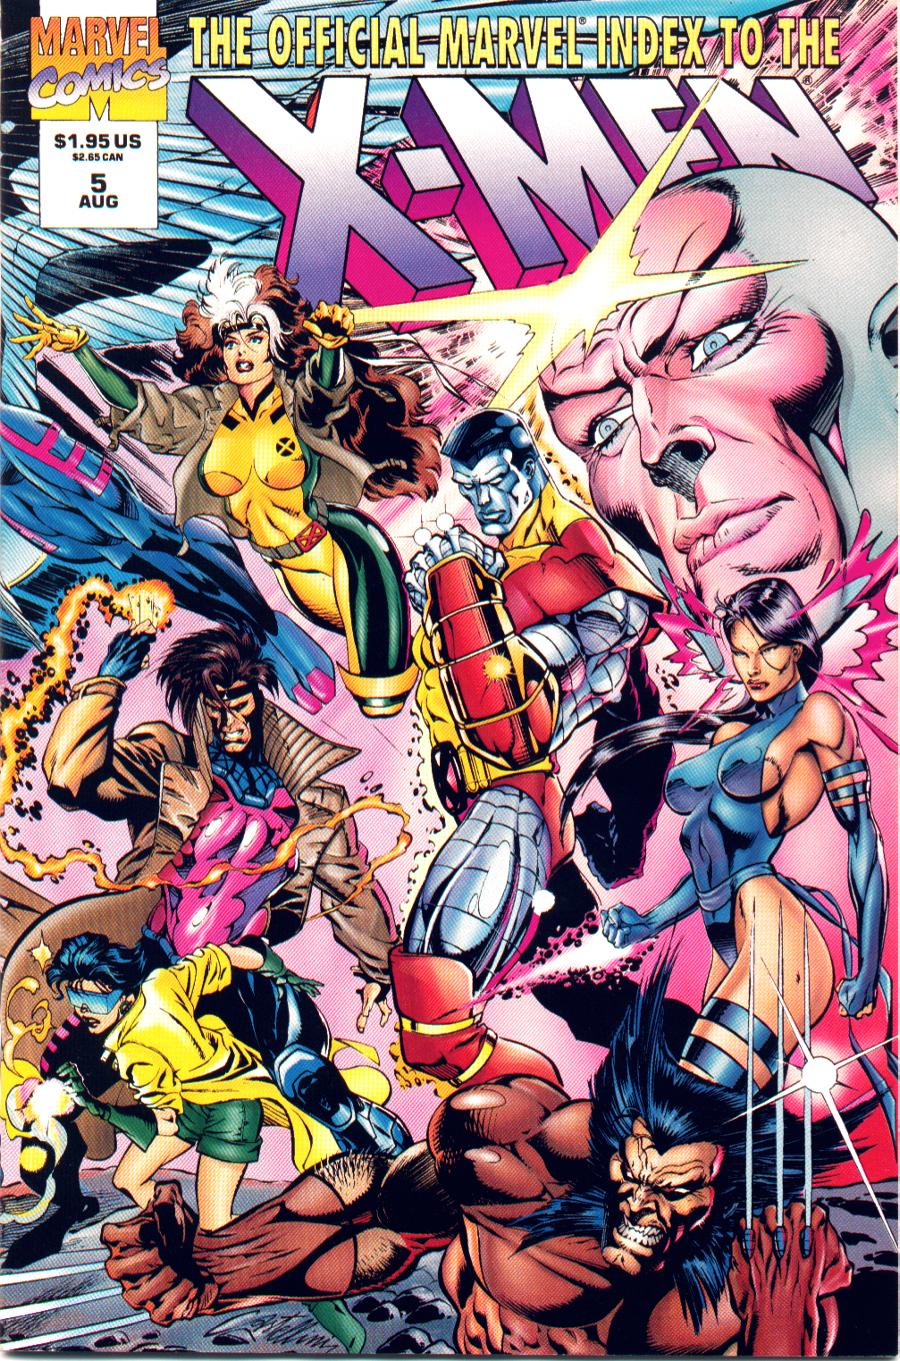 The Official Marvel Index To The X-Men (1994) issue 5 - Page 1